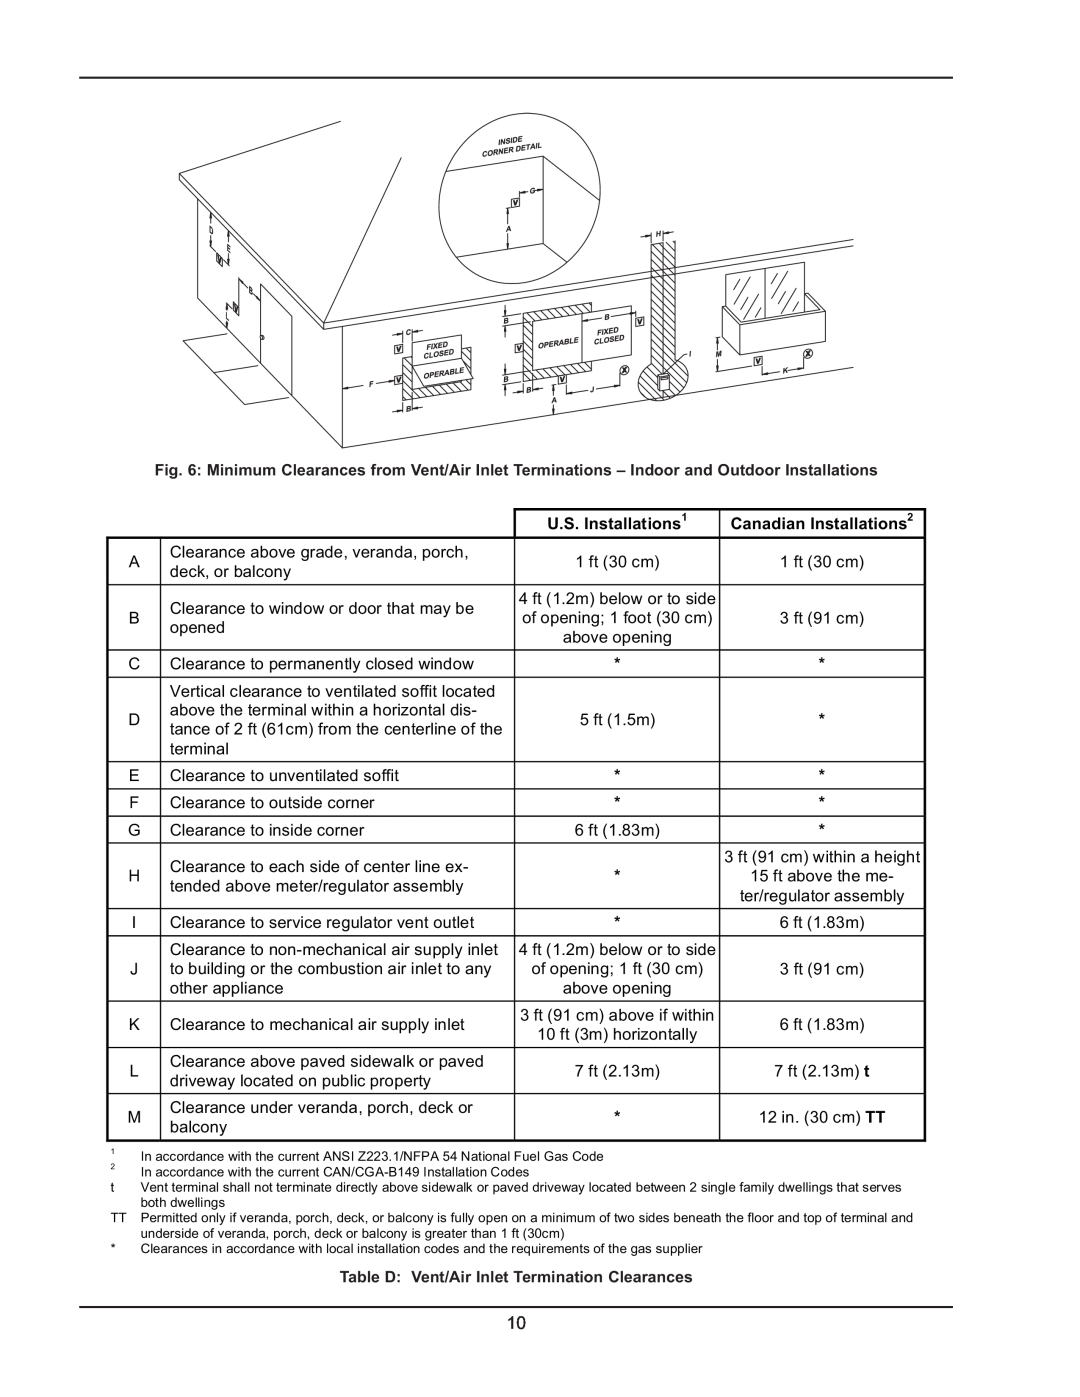 Raypak 399B-2339B U.S. Installations1, Canadian Installations2, Table D Vent/Air Inlet Termination Clearances 